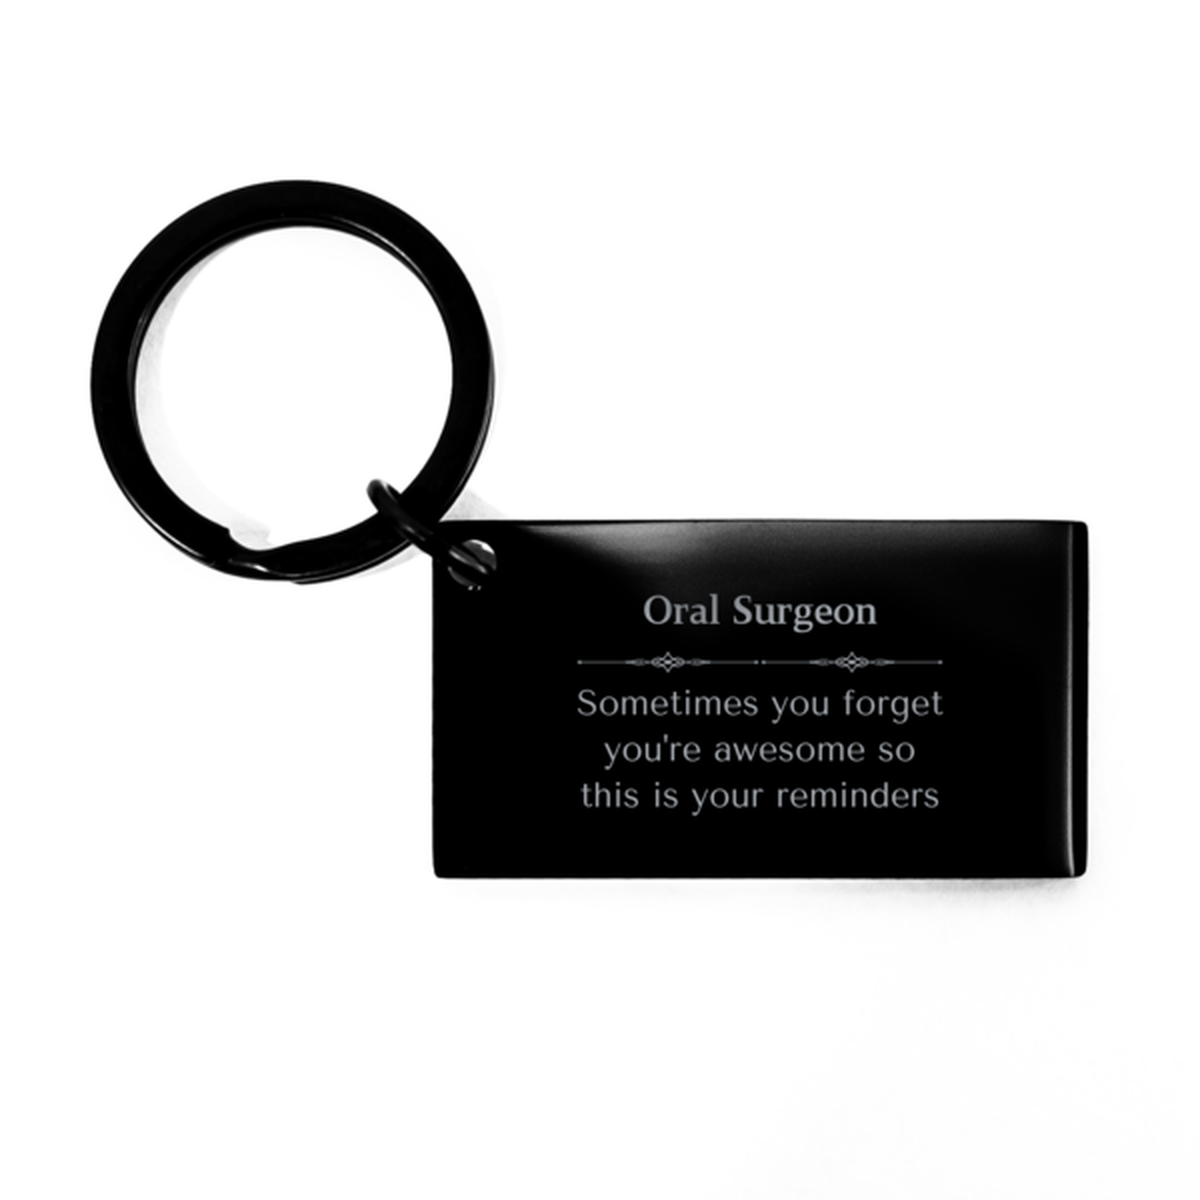 Sentimental Oral Surgeon Keychain, Postal Worker Sometimes you forget you're awesome so this is your reminders, Graduation Christmas Birthday Gifts for Oral Surgeon, Men, Women, Coworkers